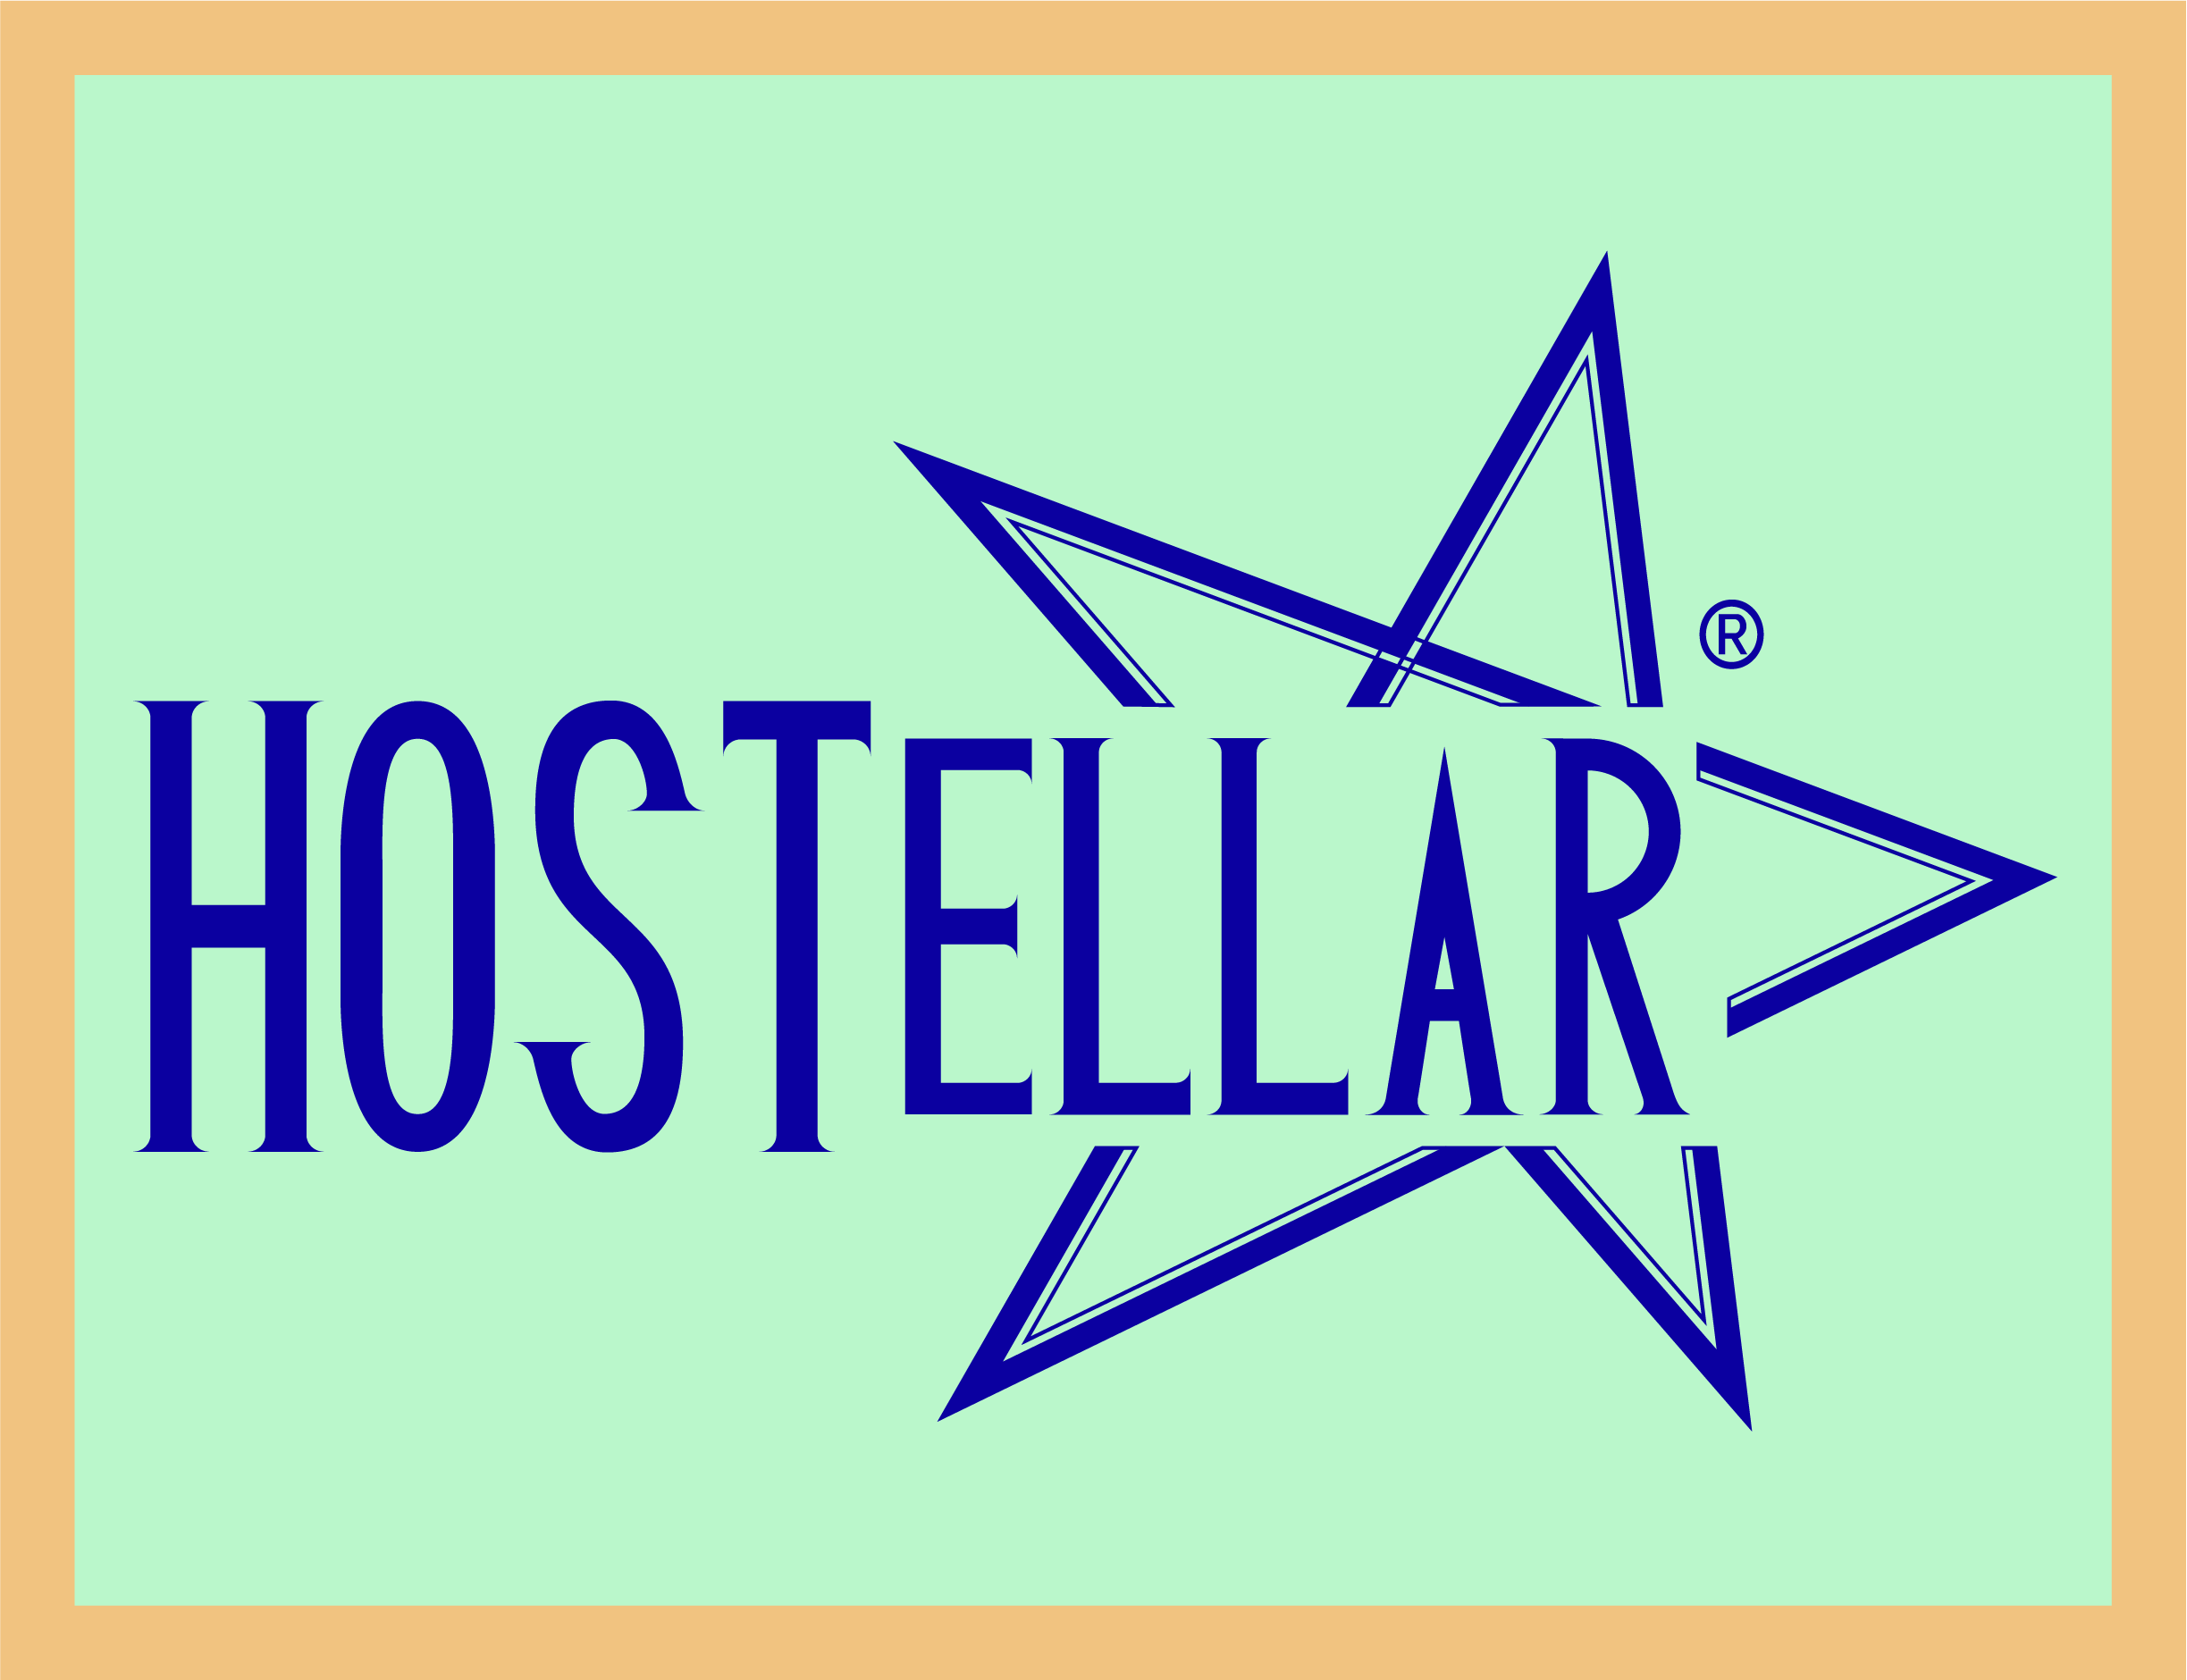 Logo of HOSTELLAR - the research product that is the 'host capability descriptor'